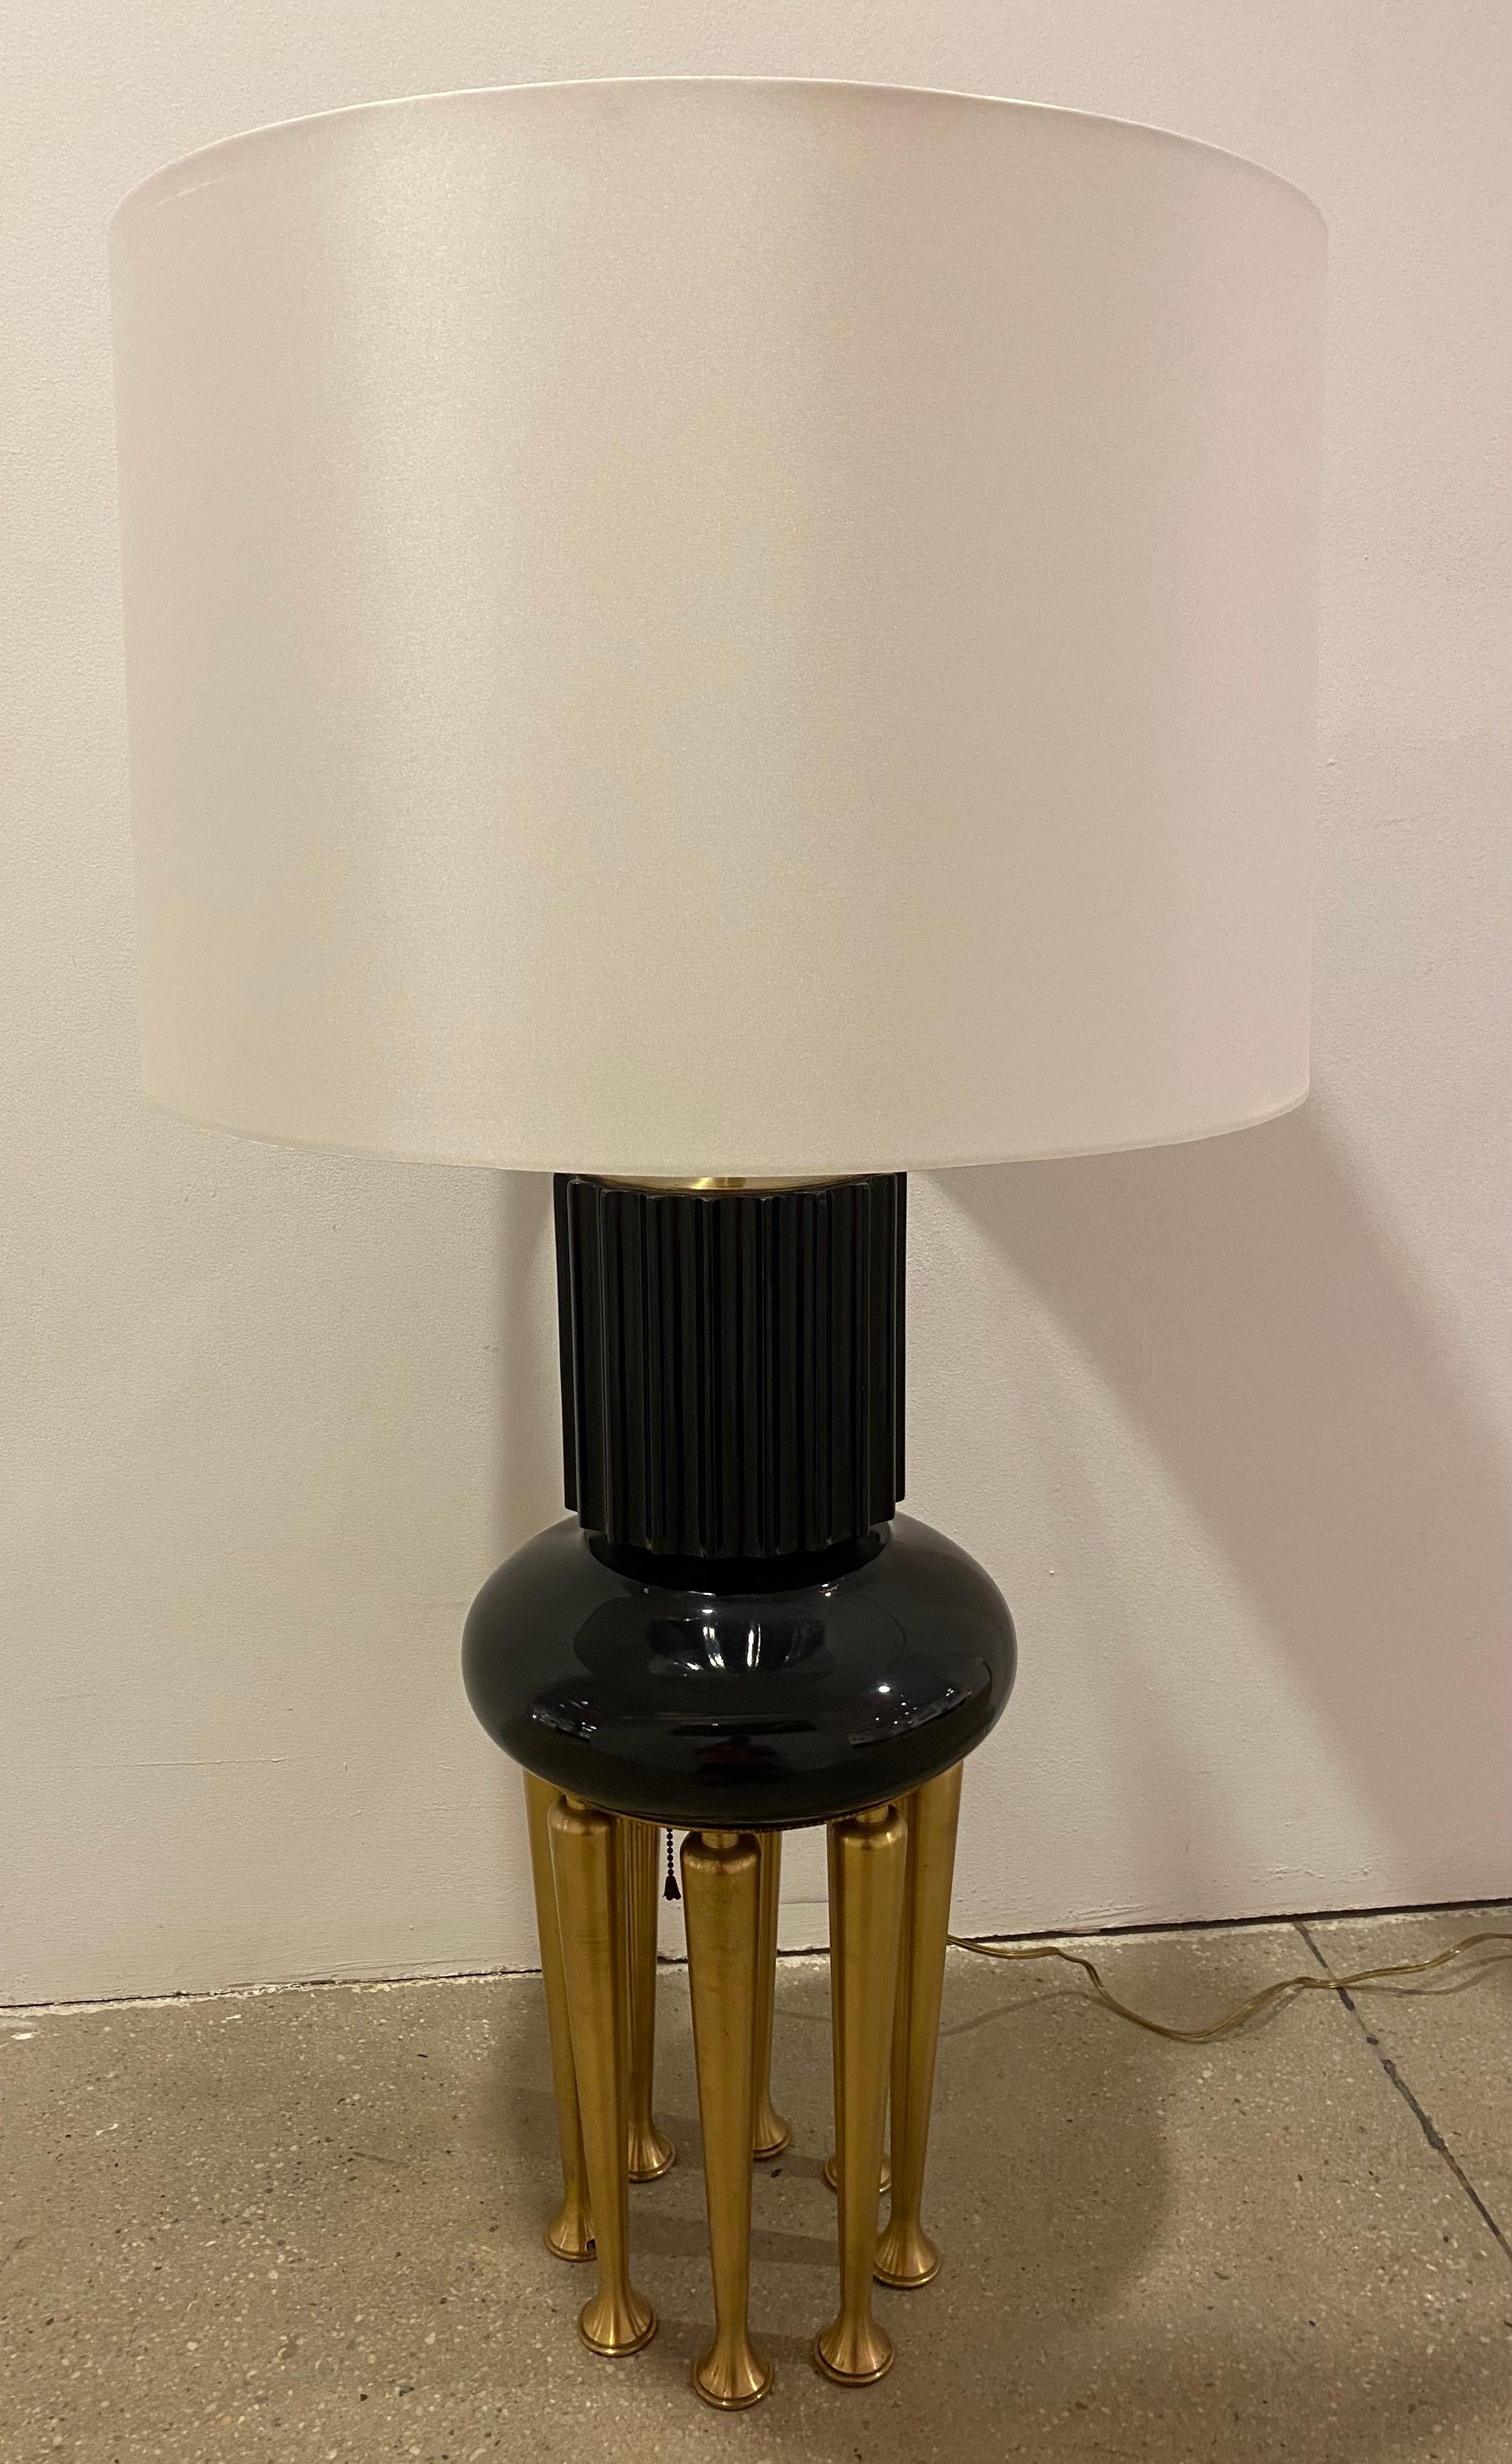 An iconic pair of American designer, James Mont’s War of the World Table lamps. They are composed of black enameled plaster bodies with polished bronze legs. The have a downward light under the body which illuminates the legs. Very good original